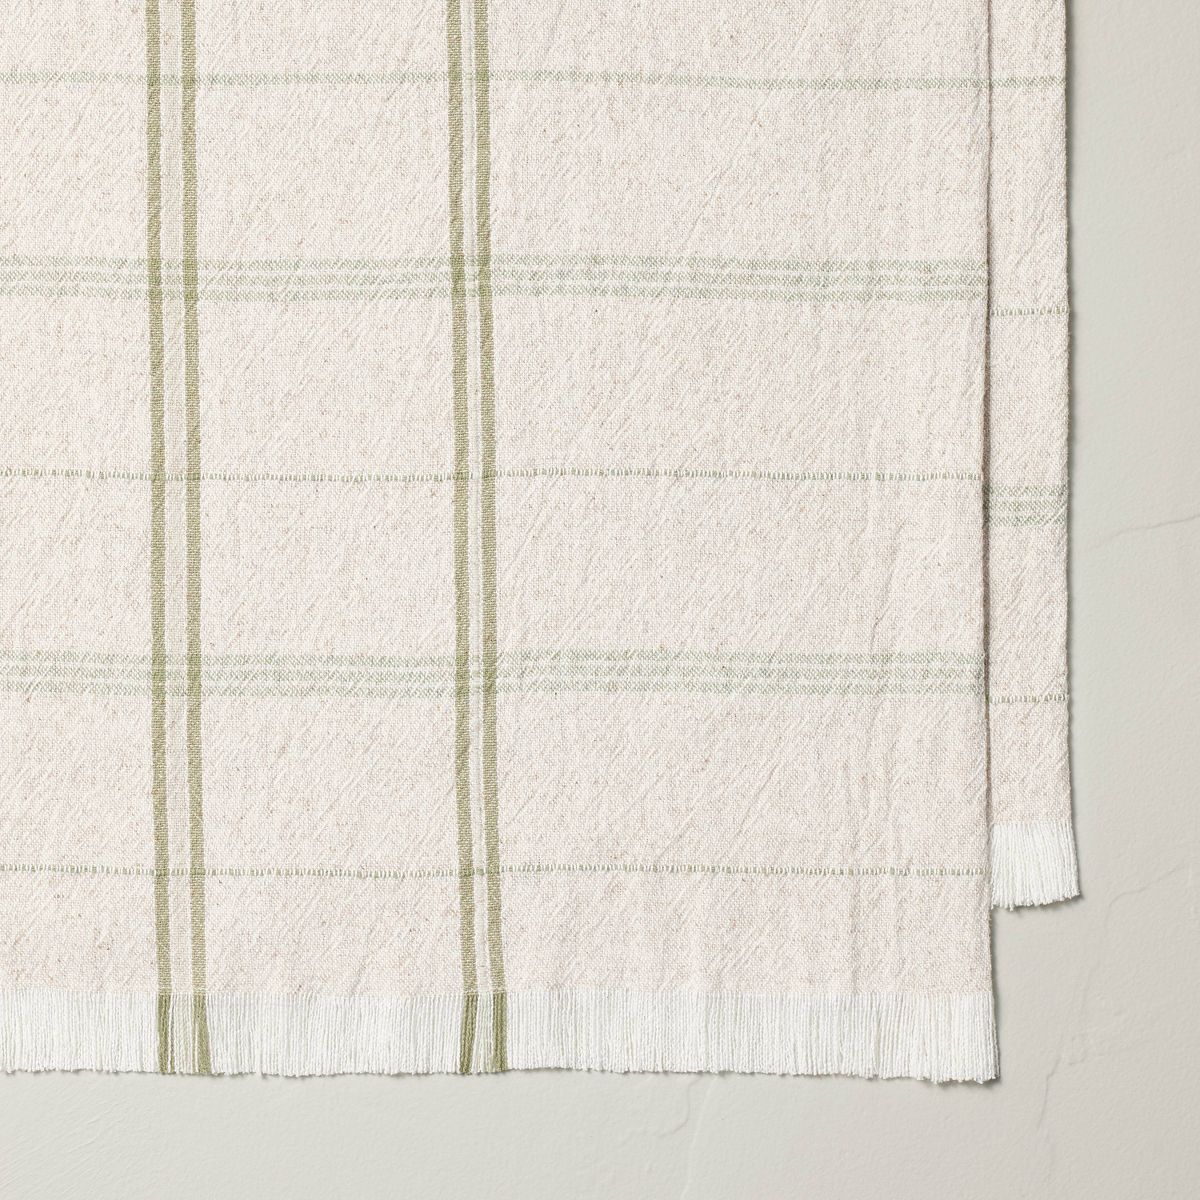 20"x90" Tri-Stripe Plaid Woven Table Runner Light Green/Natural - Hearth & Hand™ with Magnolia | Target